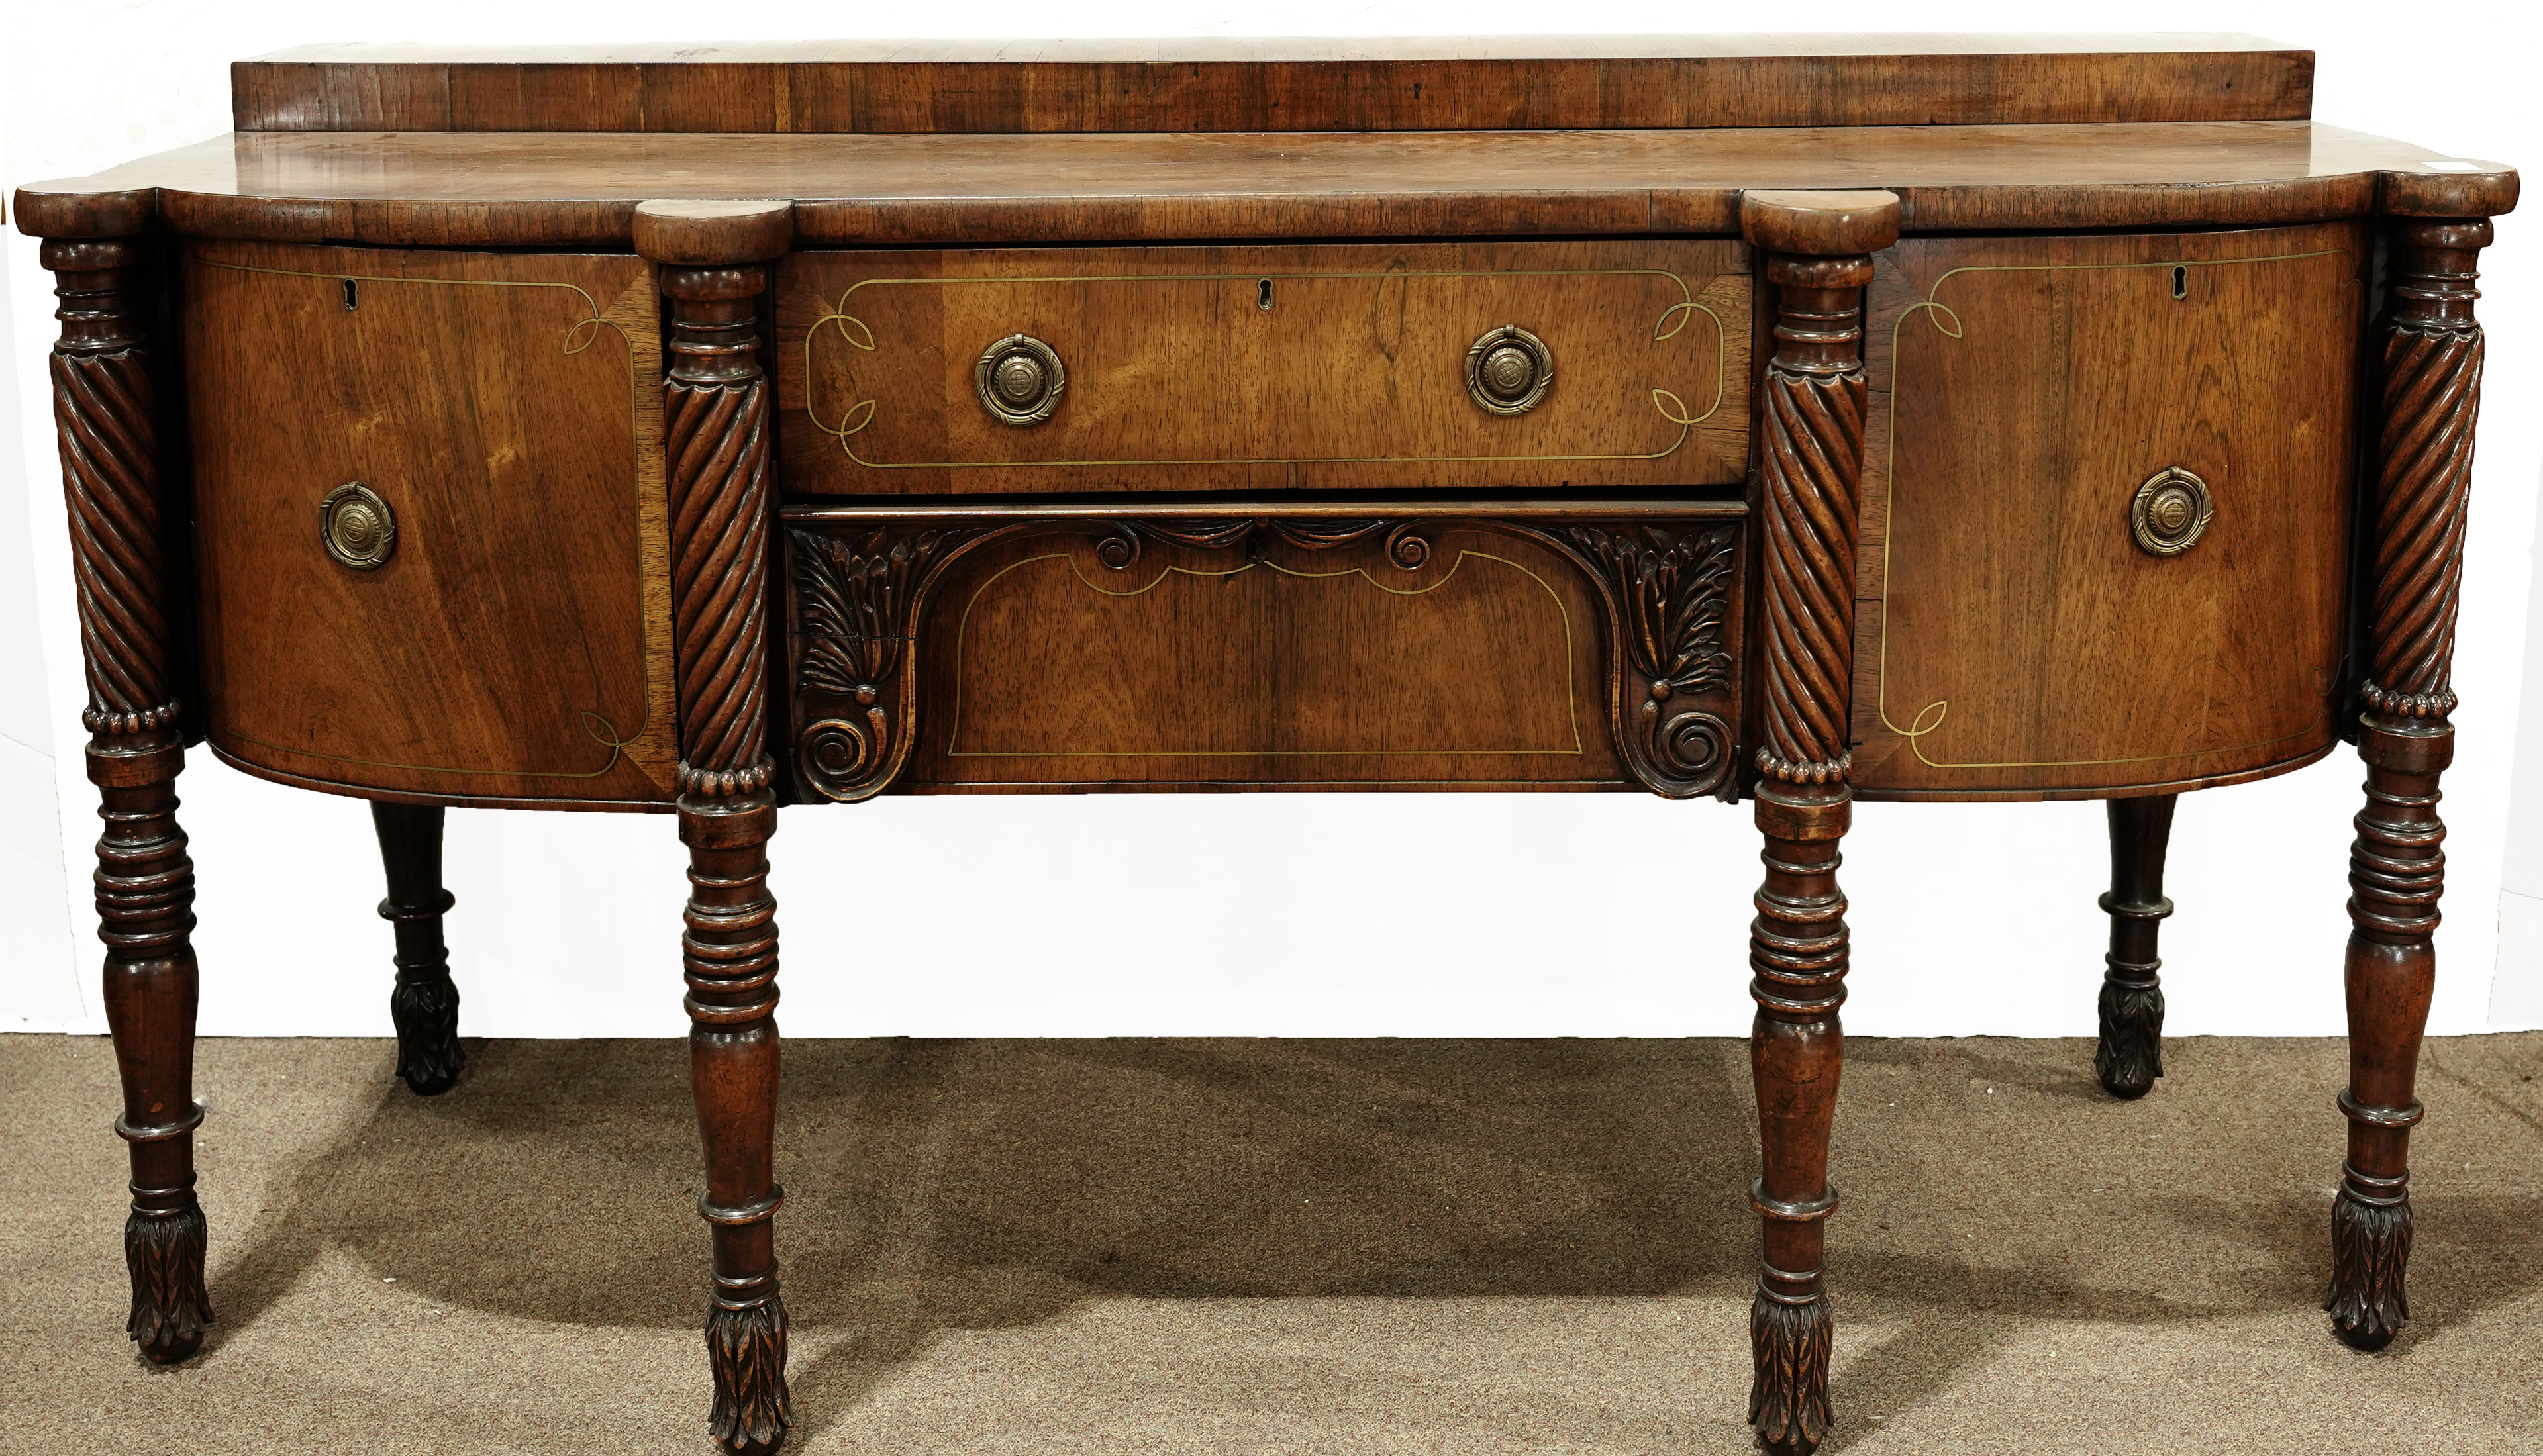 A WILLIAM IV ROSEWOOD SIDEBOARD 3a68c6